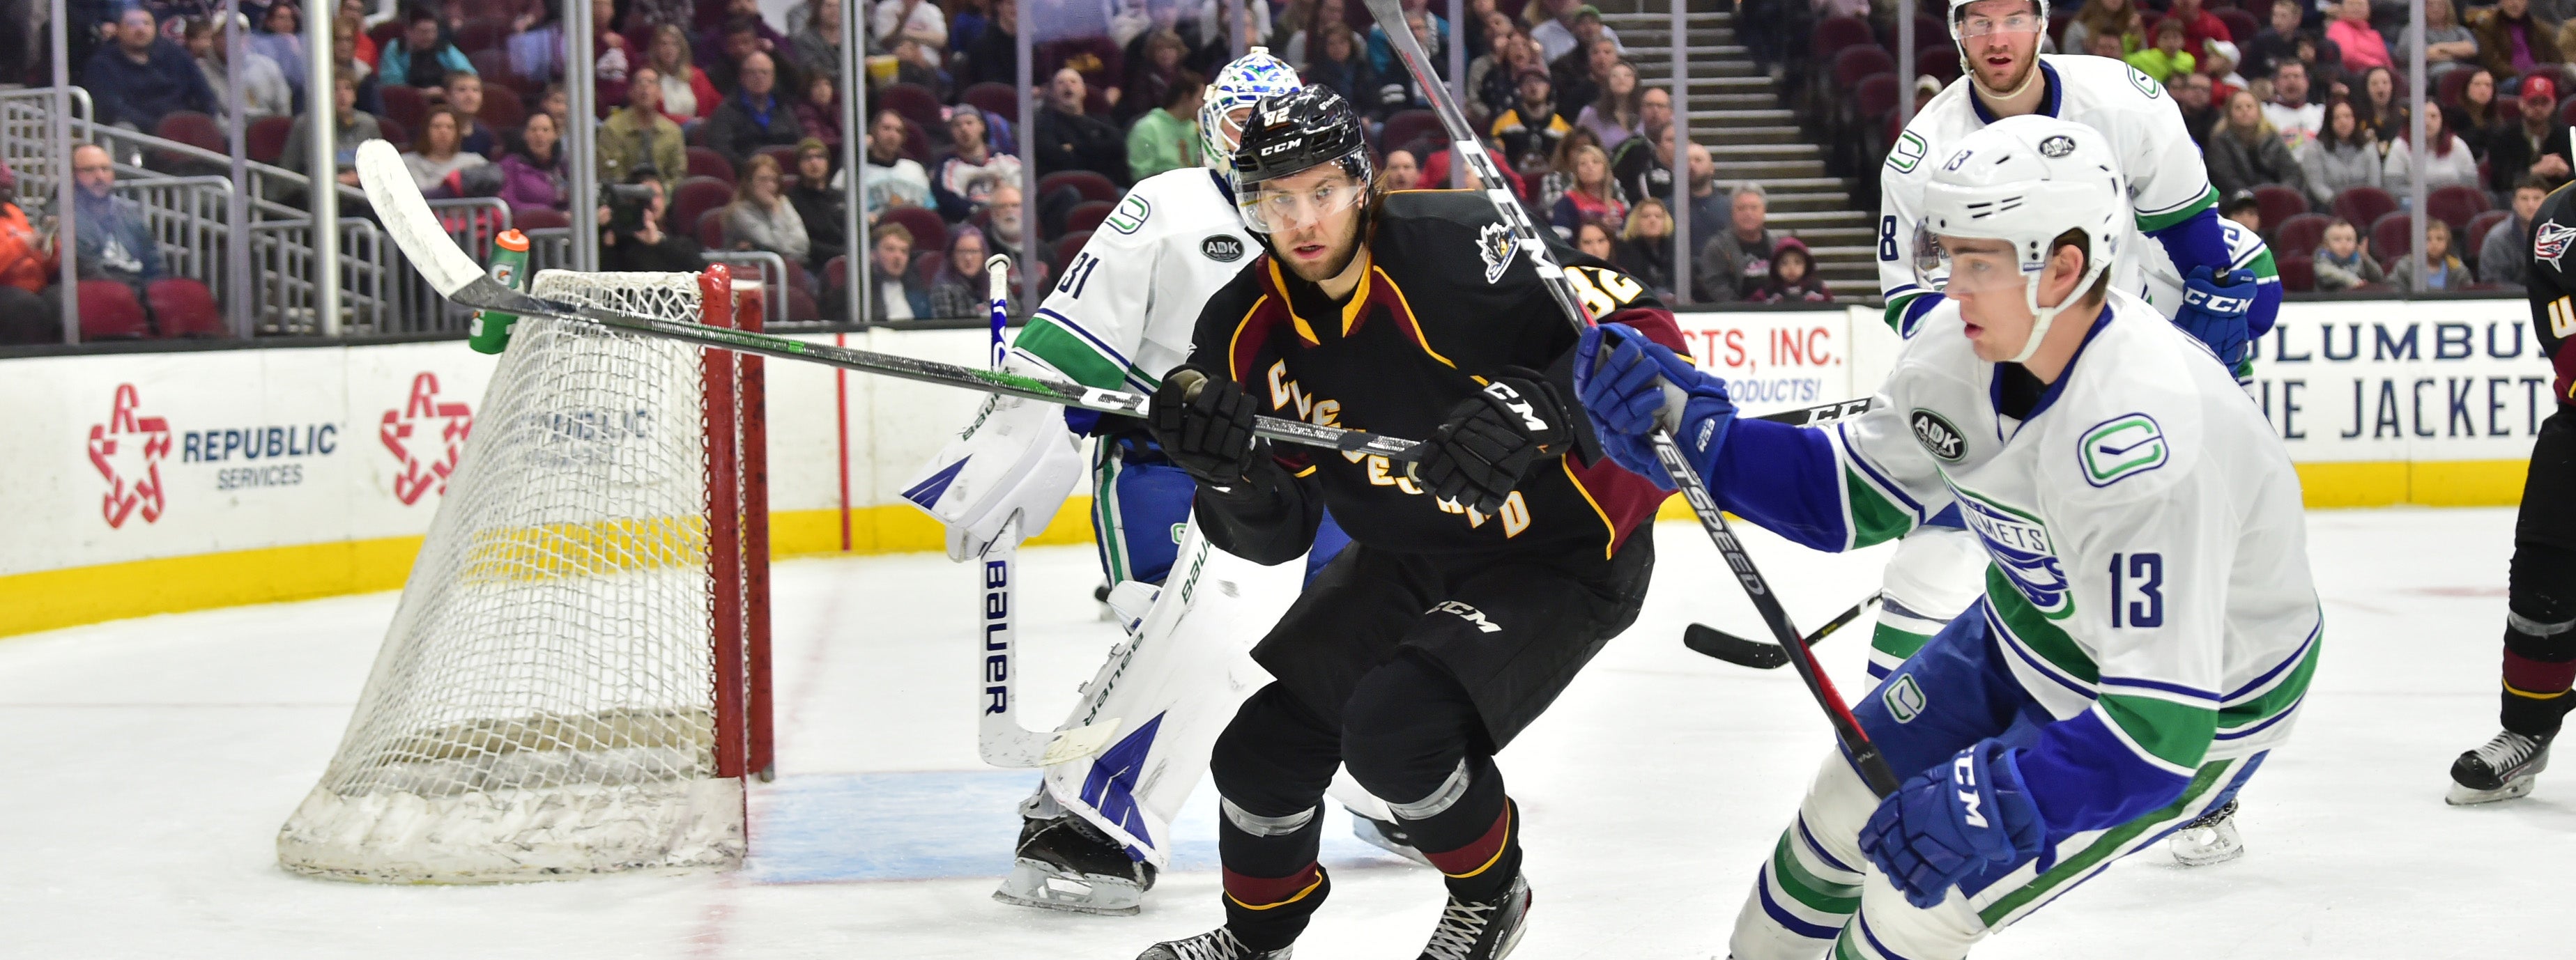 COMETS FALL VICTIM TO MONSTERS' SPECIAL TEAMS